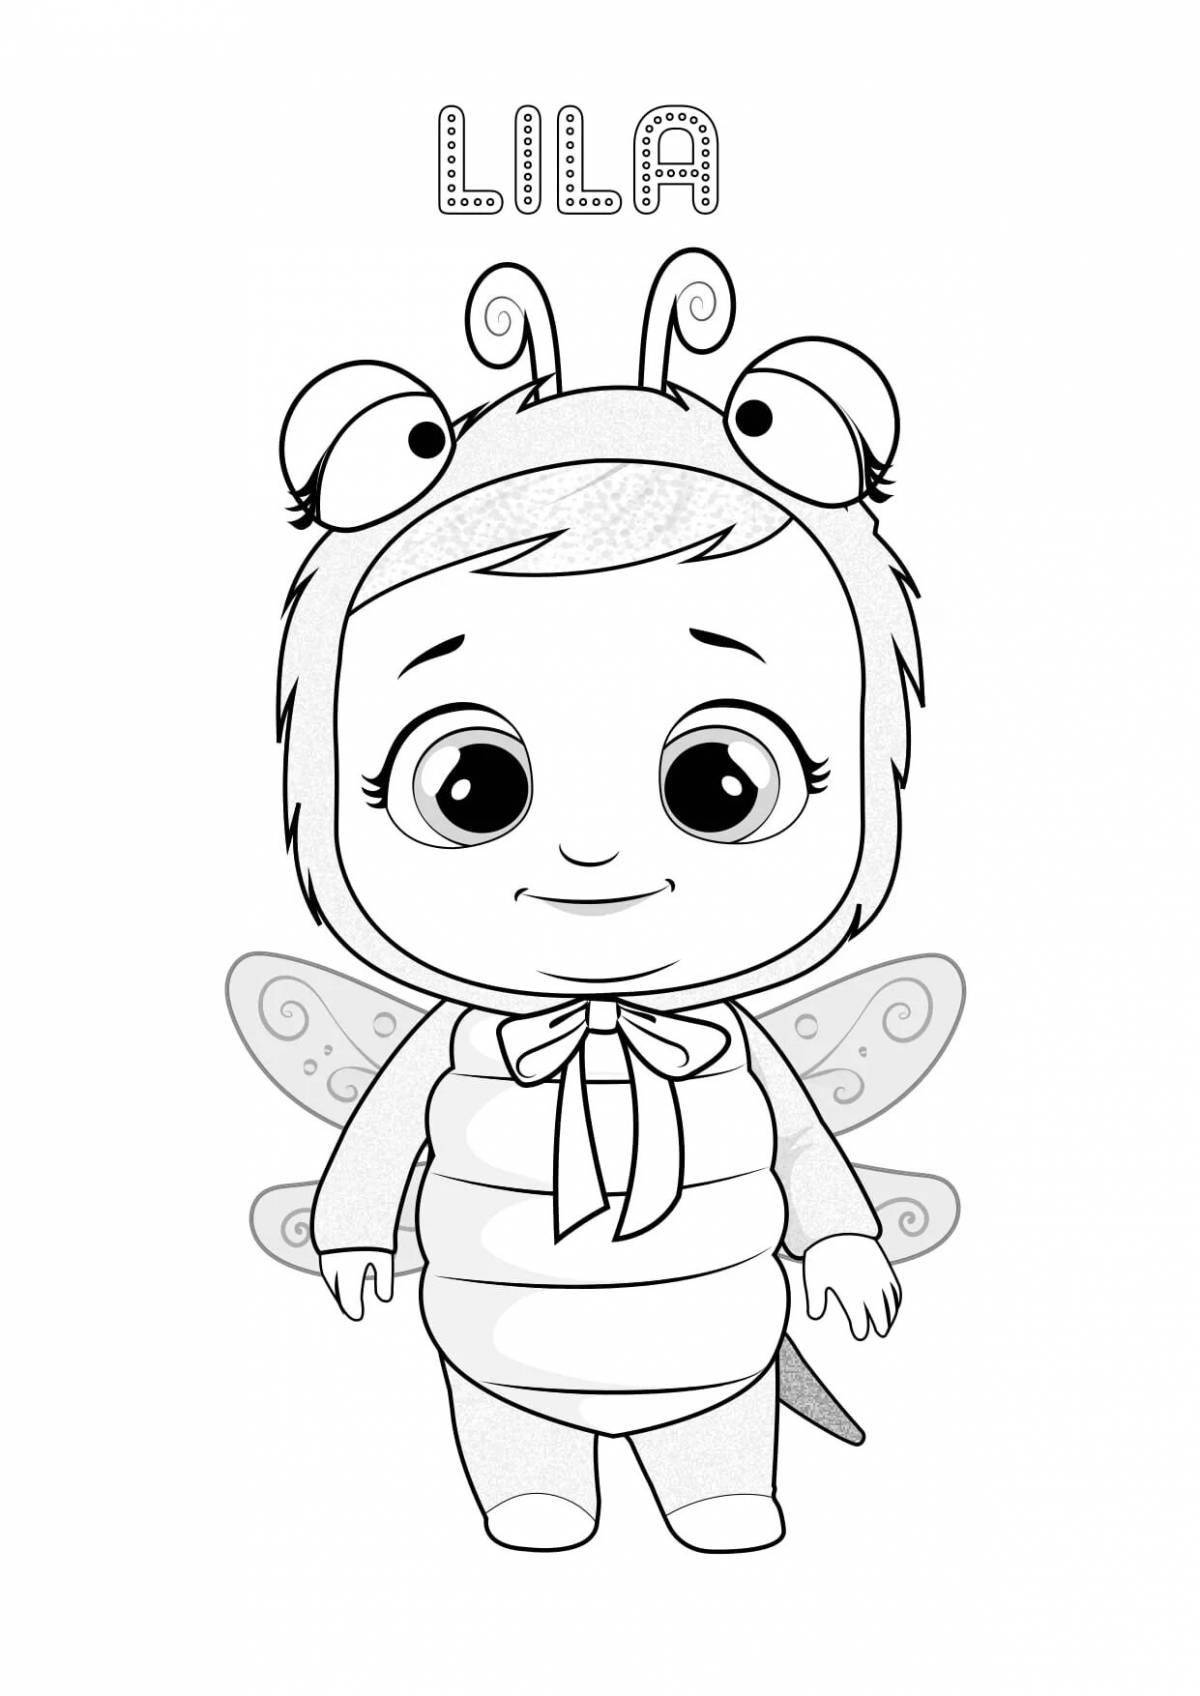 Adorable baby charon coloring page